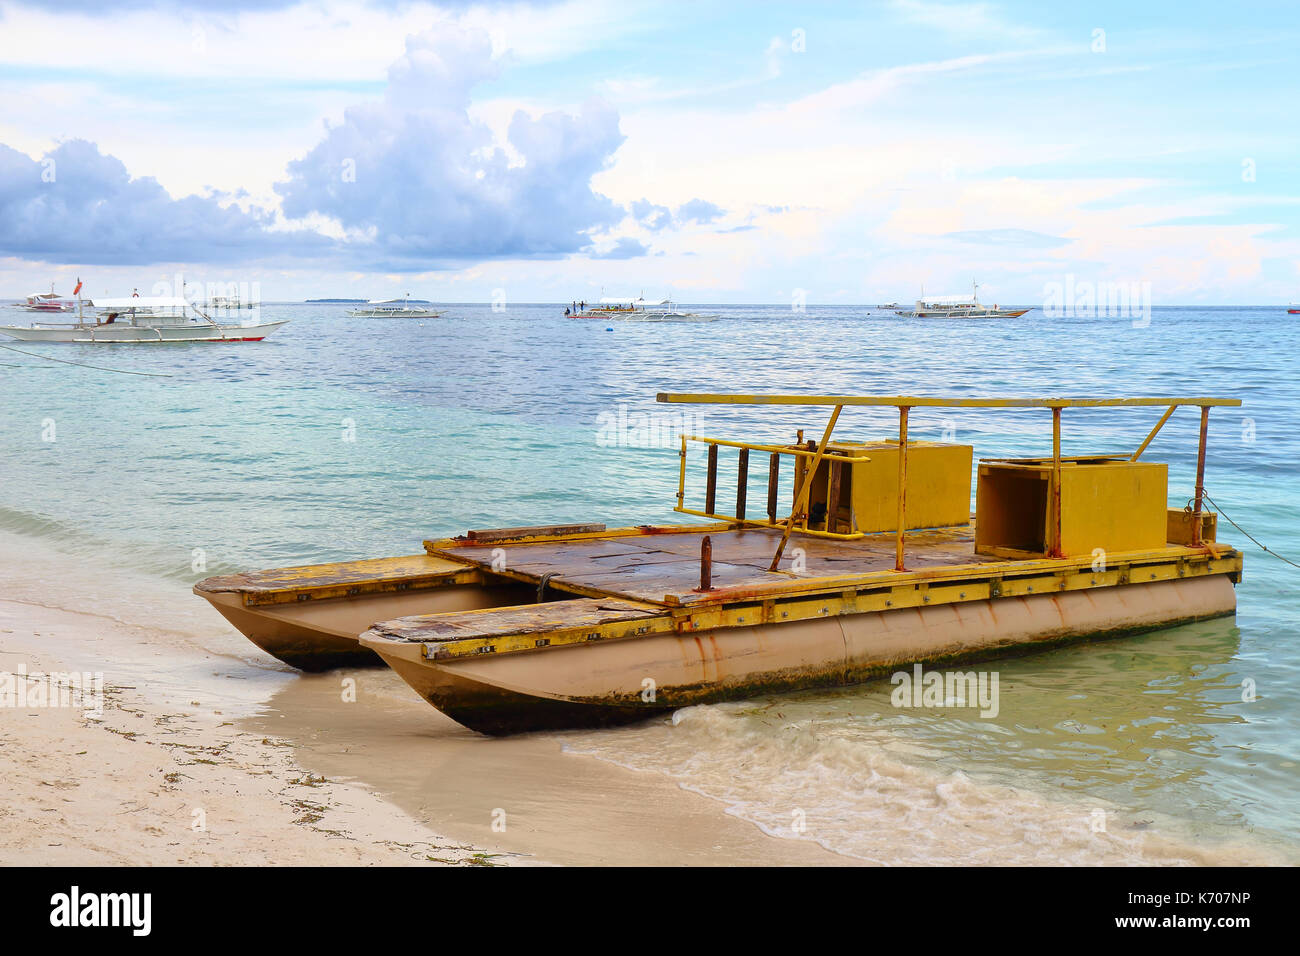 https://c8.alamy.com/comp/K707NP/an-old-rusty-twin-hull-boat-used-to-transport-tourist-in-the-tropical-K707NP.jpg